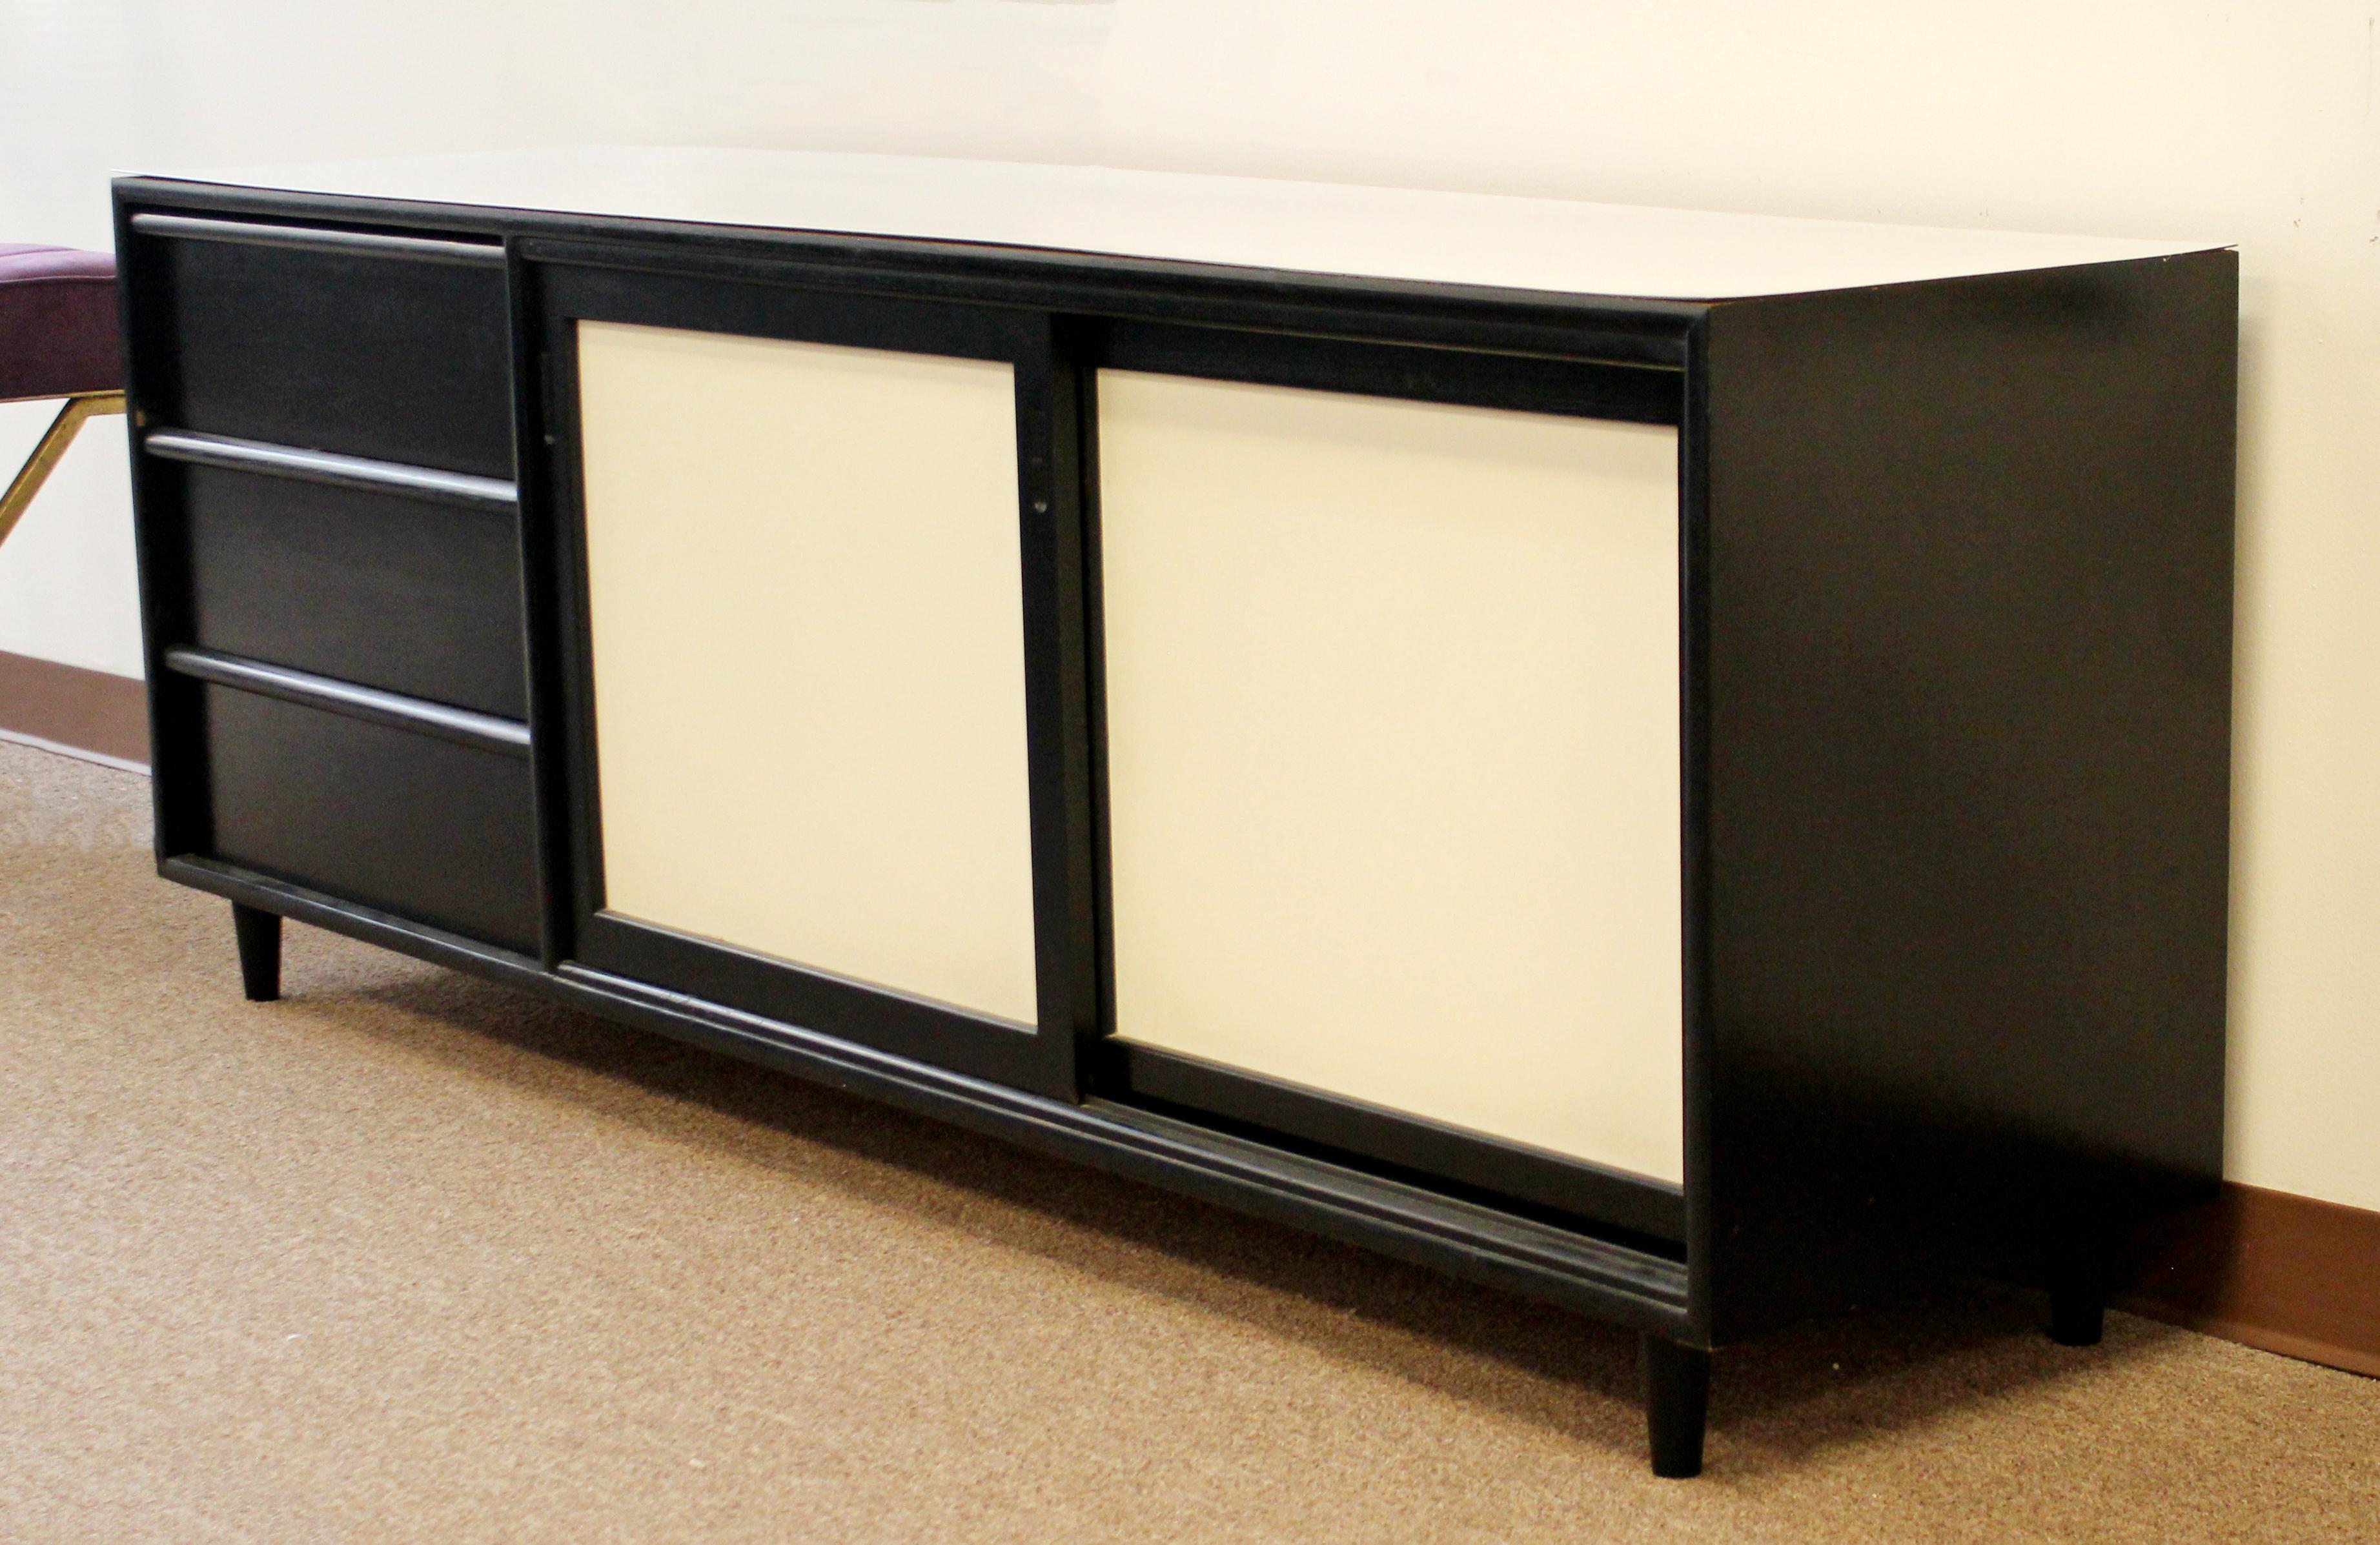 For your consideration is a marvelous, black and white credenza, with three drawers, by Hibriten, circa 1960s. In excellent vintage condition. The dimensions are 71.25